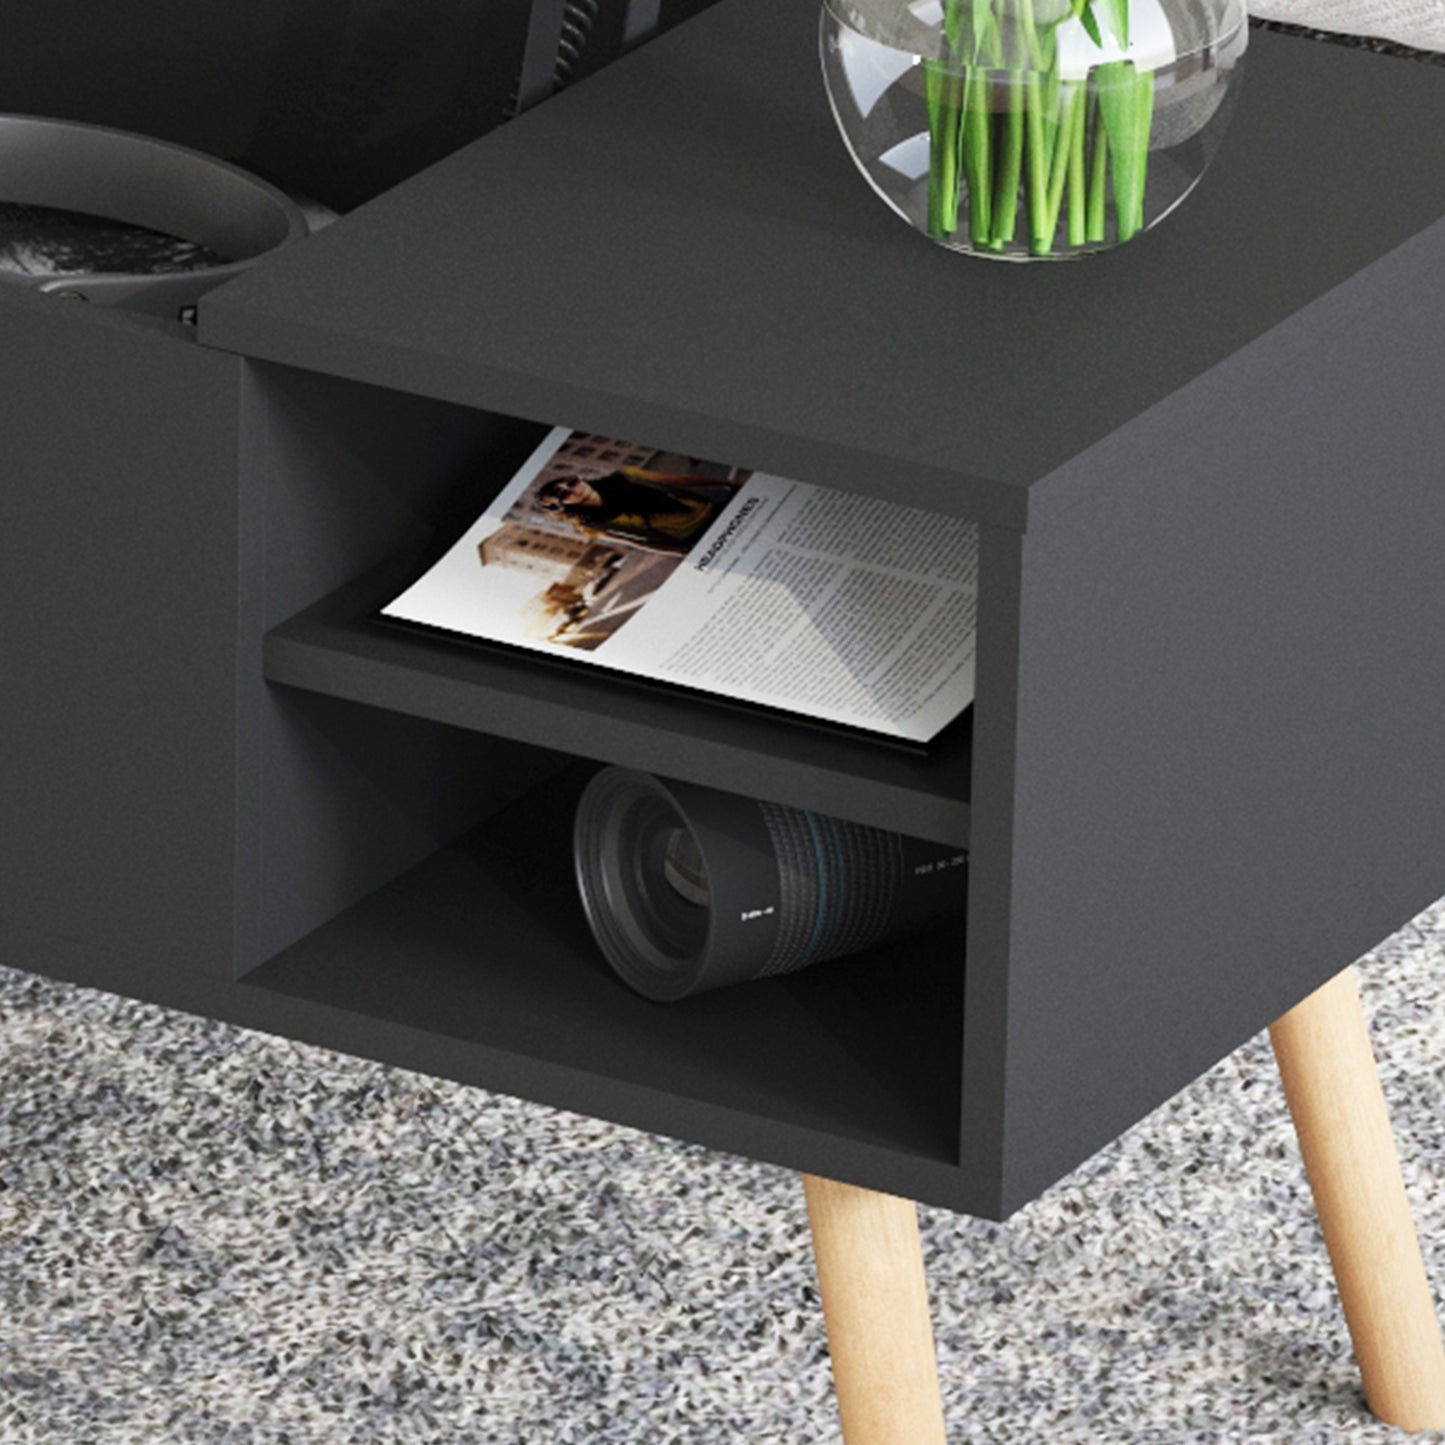 Coffee table, computer table, black, solid wood leg rest, large storage space, can be raised and lowered desktop